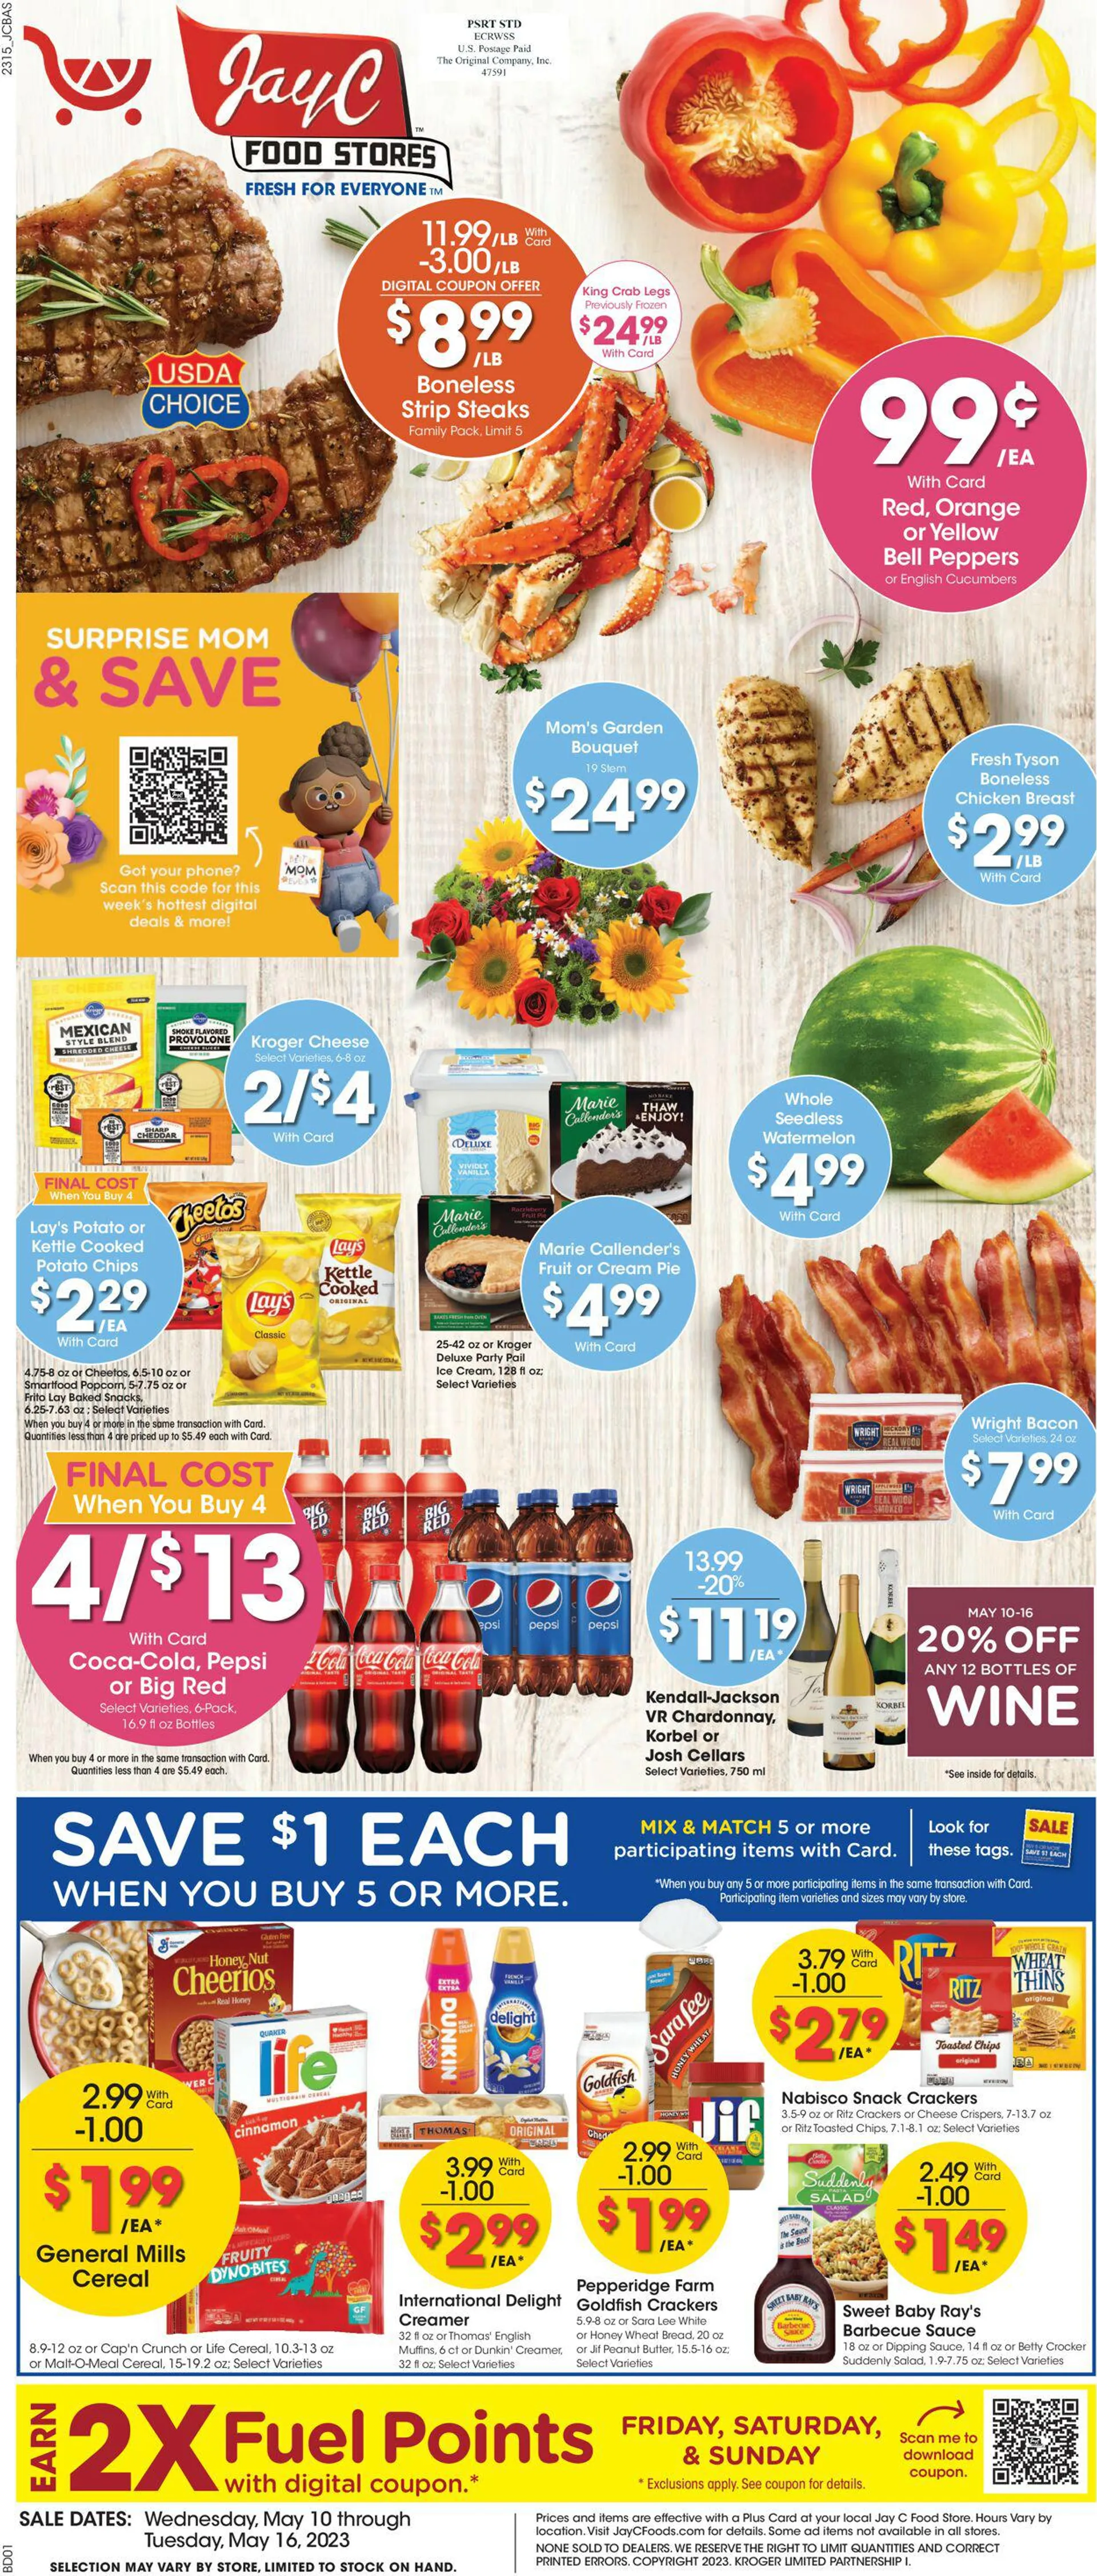 Jay C Food Stores Current weekly ad - 1